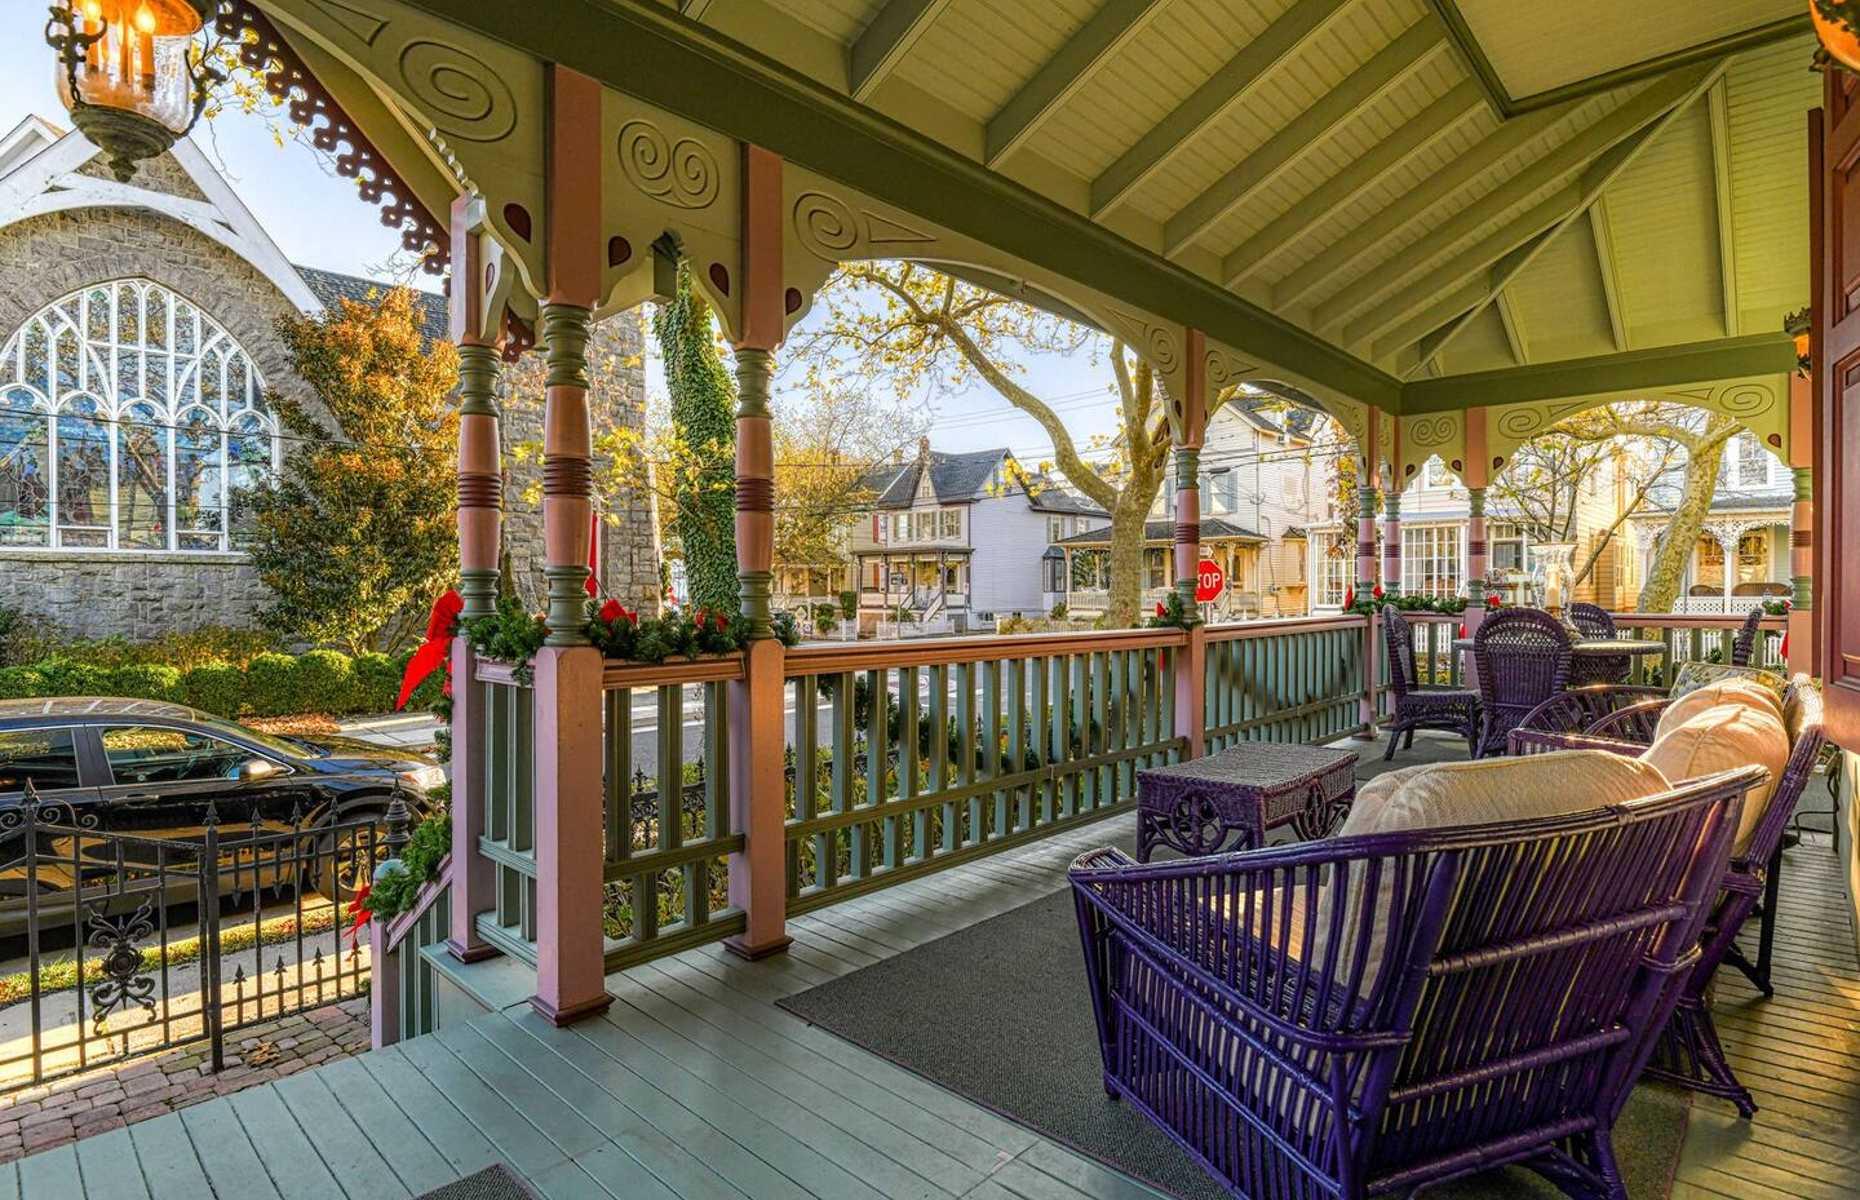 <p>Located in the heart of Cape May's historic district, this grand Victorian villa – known as '<a href="https://www.airbnb.co.uk/rooms/46607815?source_impression_id=p3_1680076754_7ZjvMY8tJ8Zyo8ej">The Empress</a>' – has eight bedroom suites, a wraparound porch, huge hosting spaces and even its own movie theater. It's located just two blocks from the nearest beach and within easy access of nearby restaurants, bars and shops.</p>